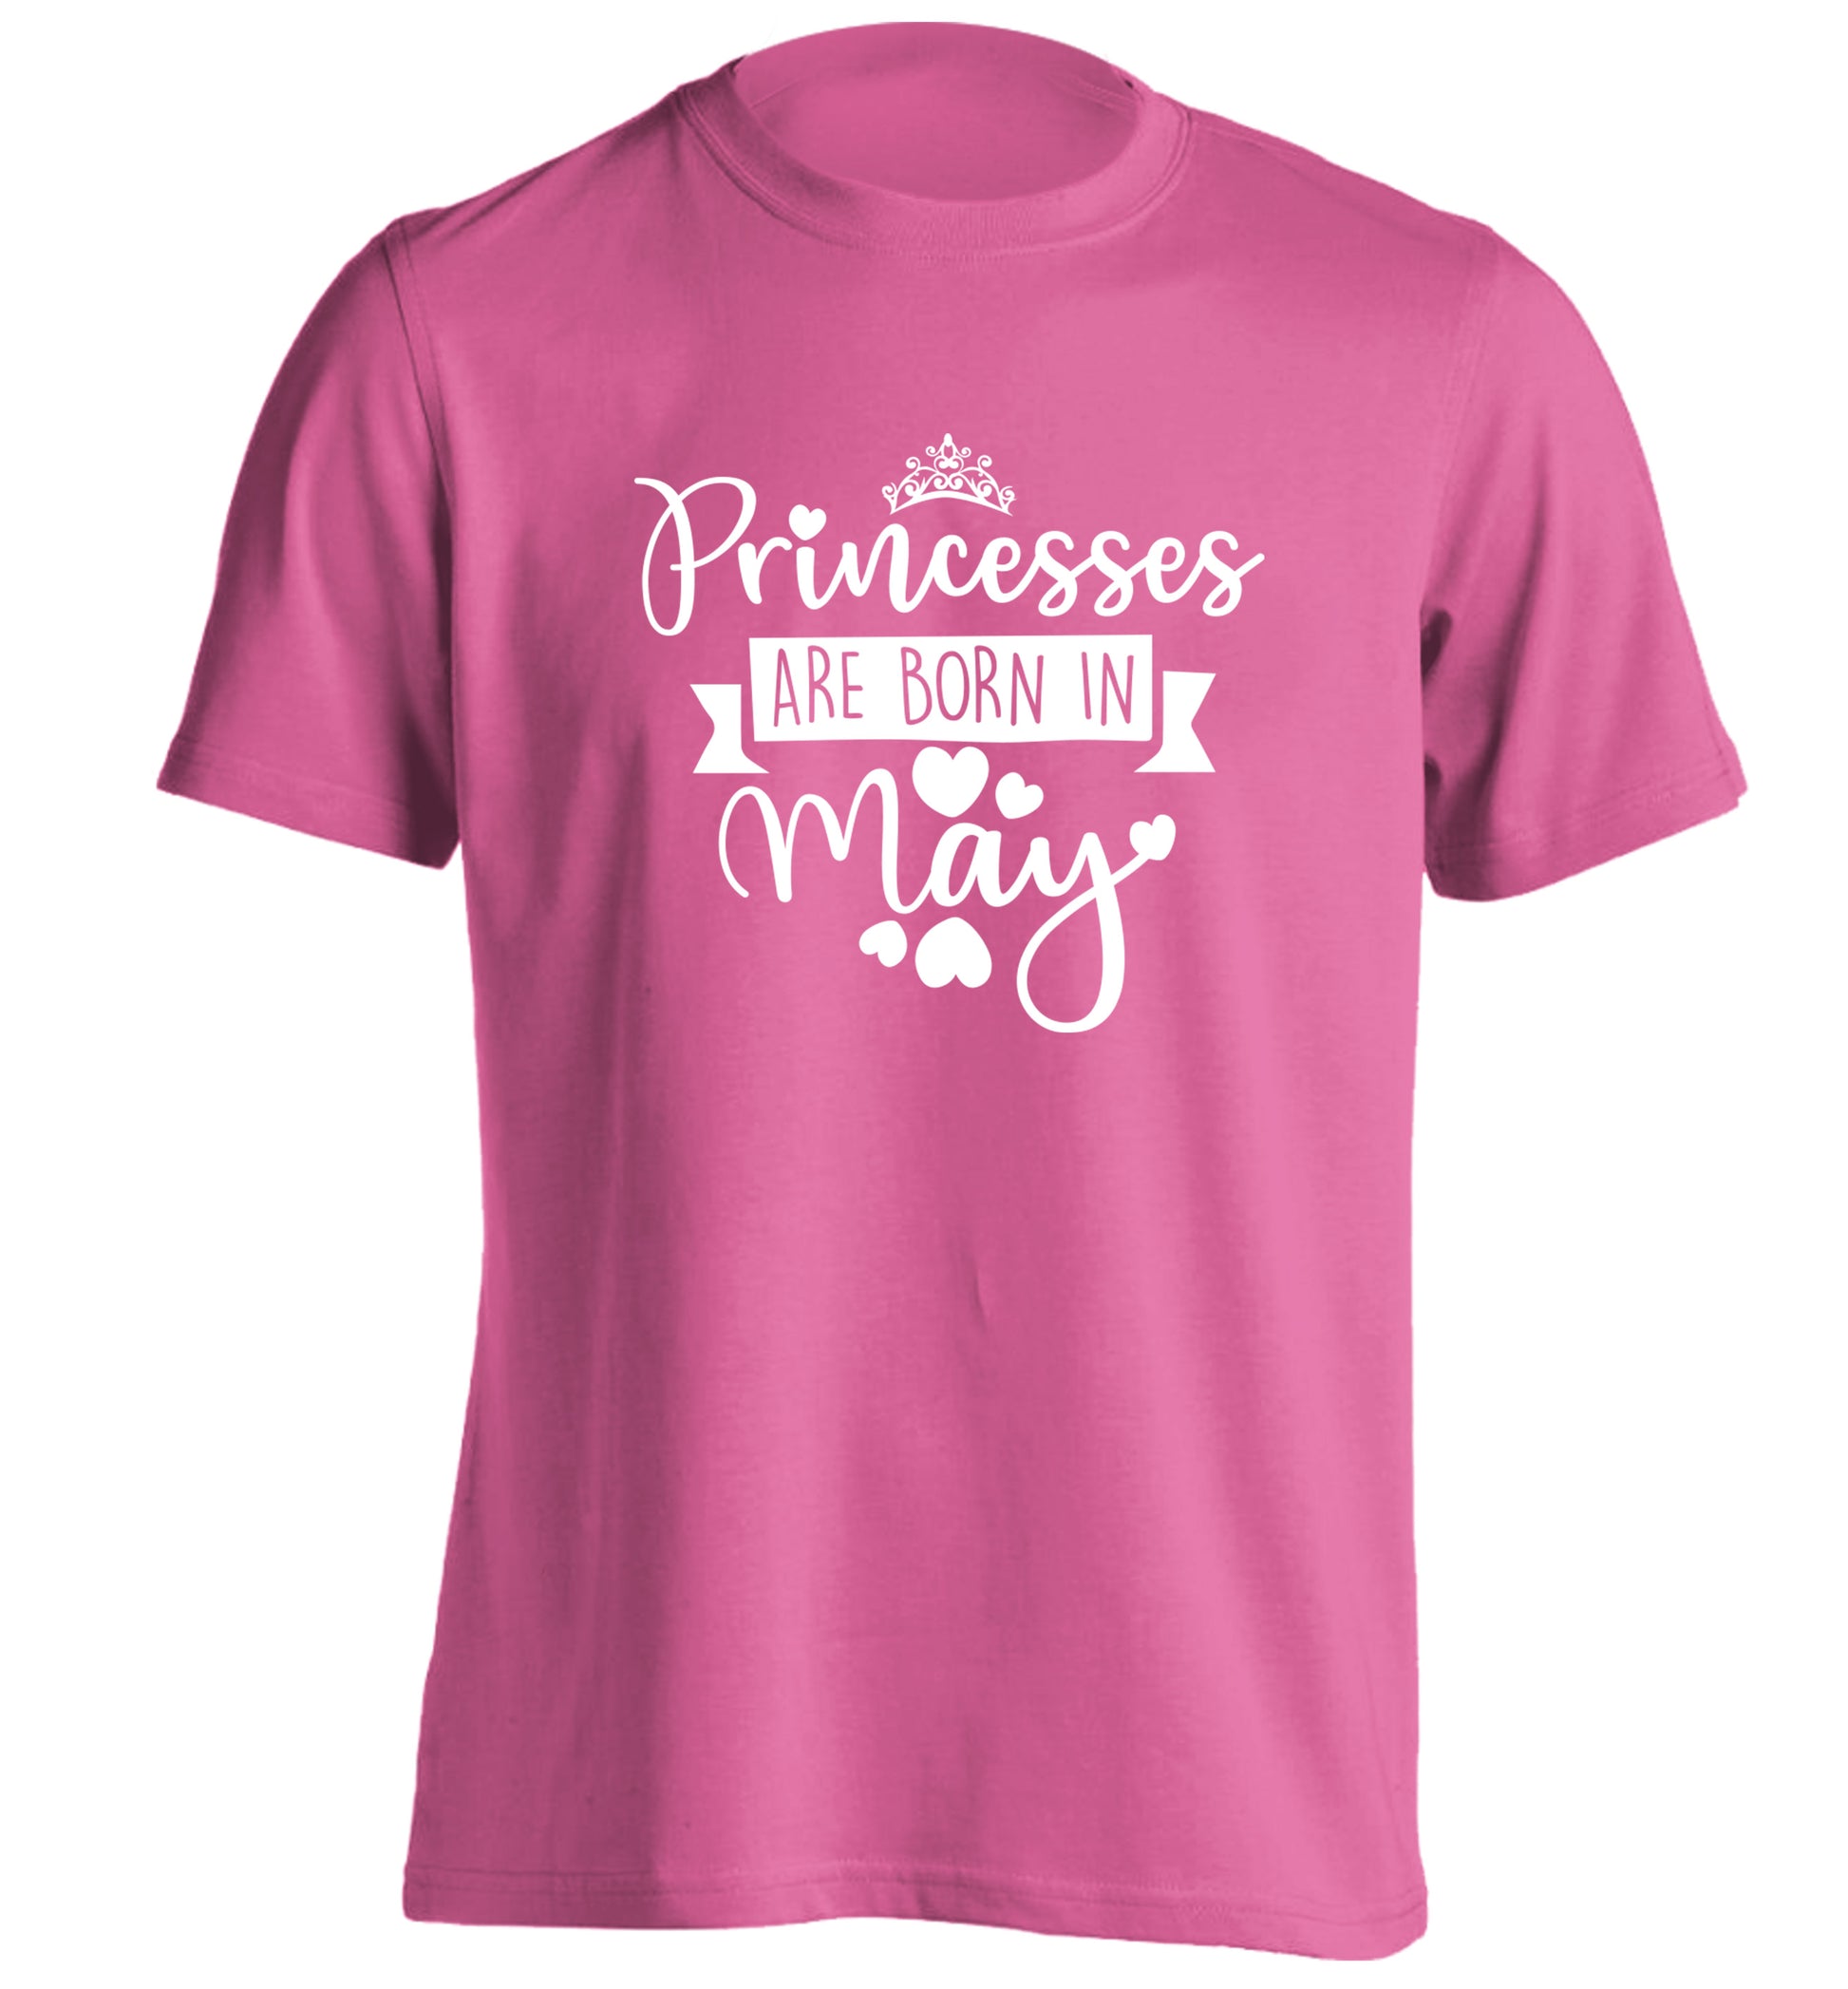 Princesses are born in May adults unisex pink Tshirt 2XL